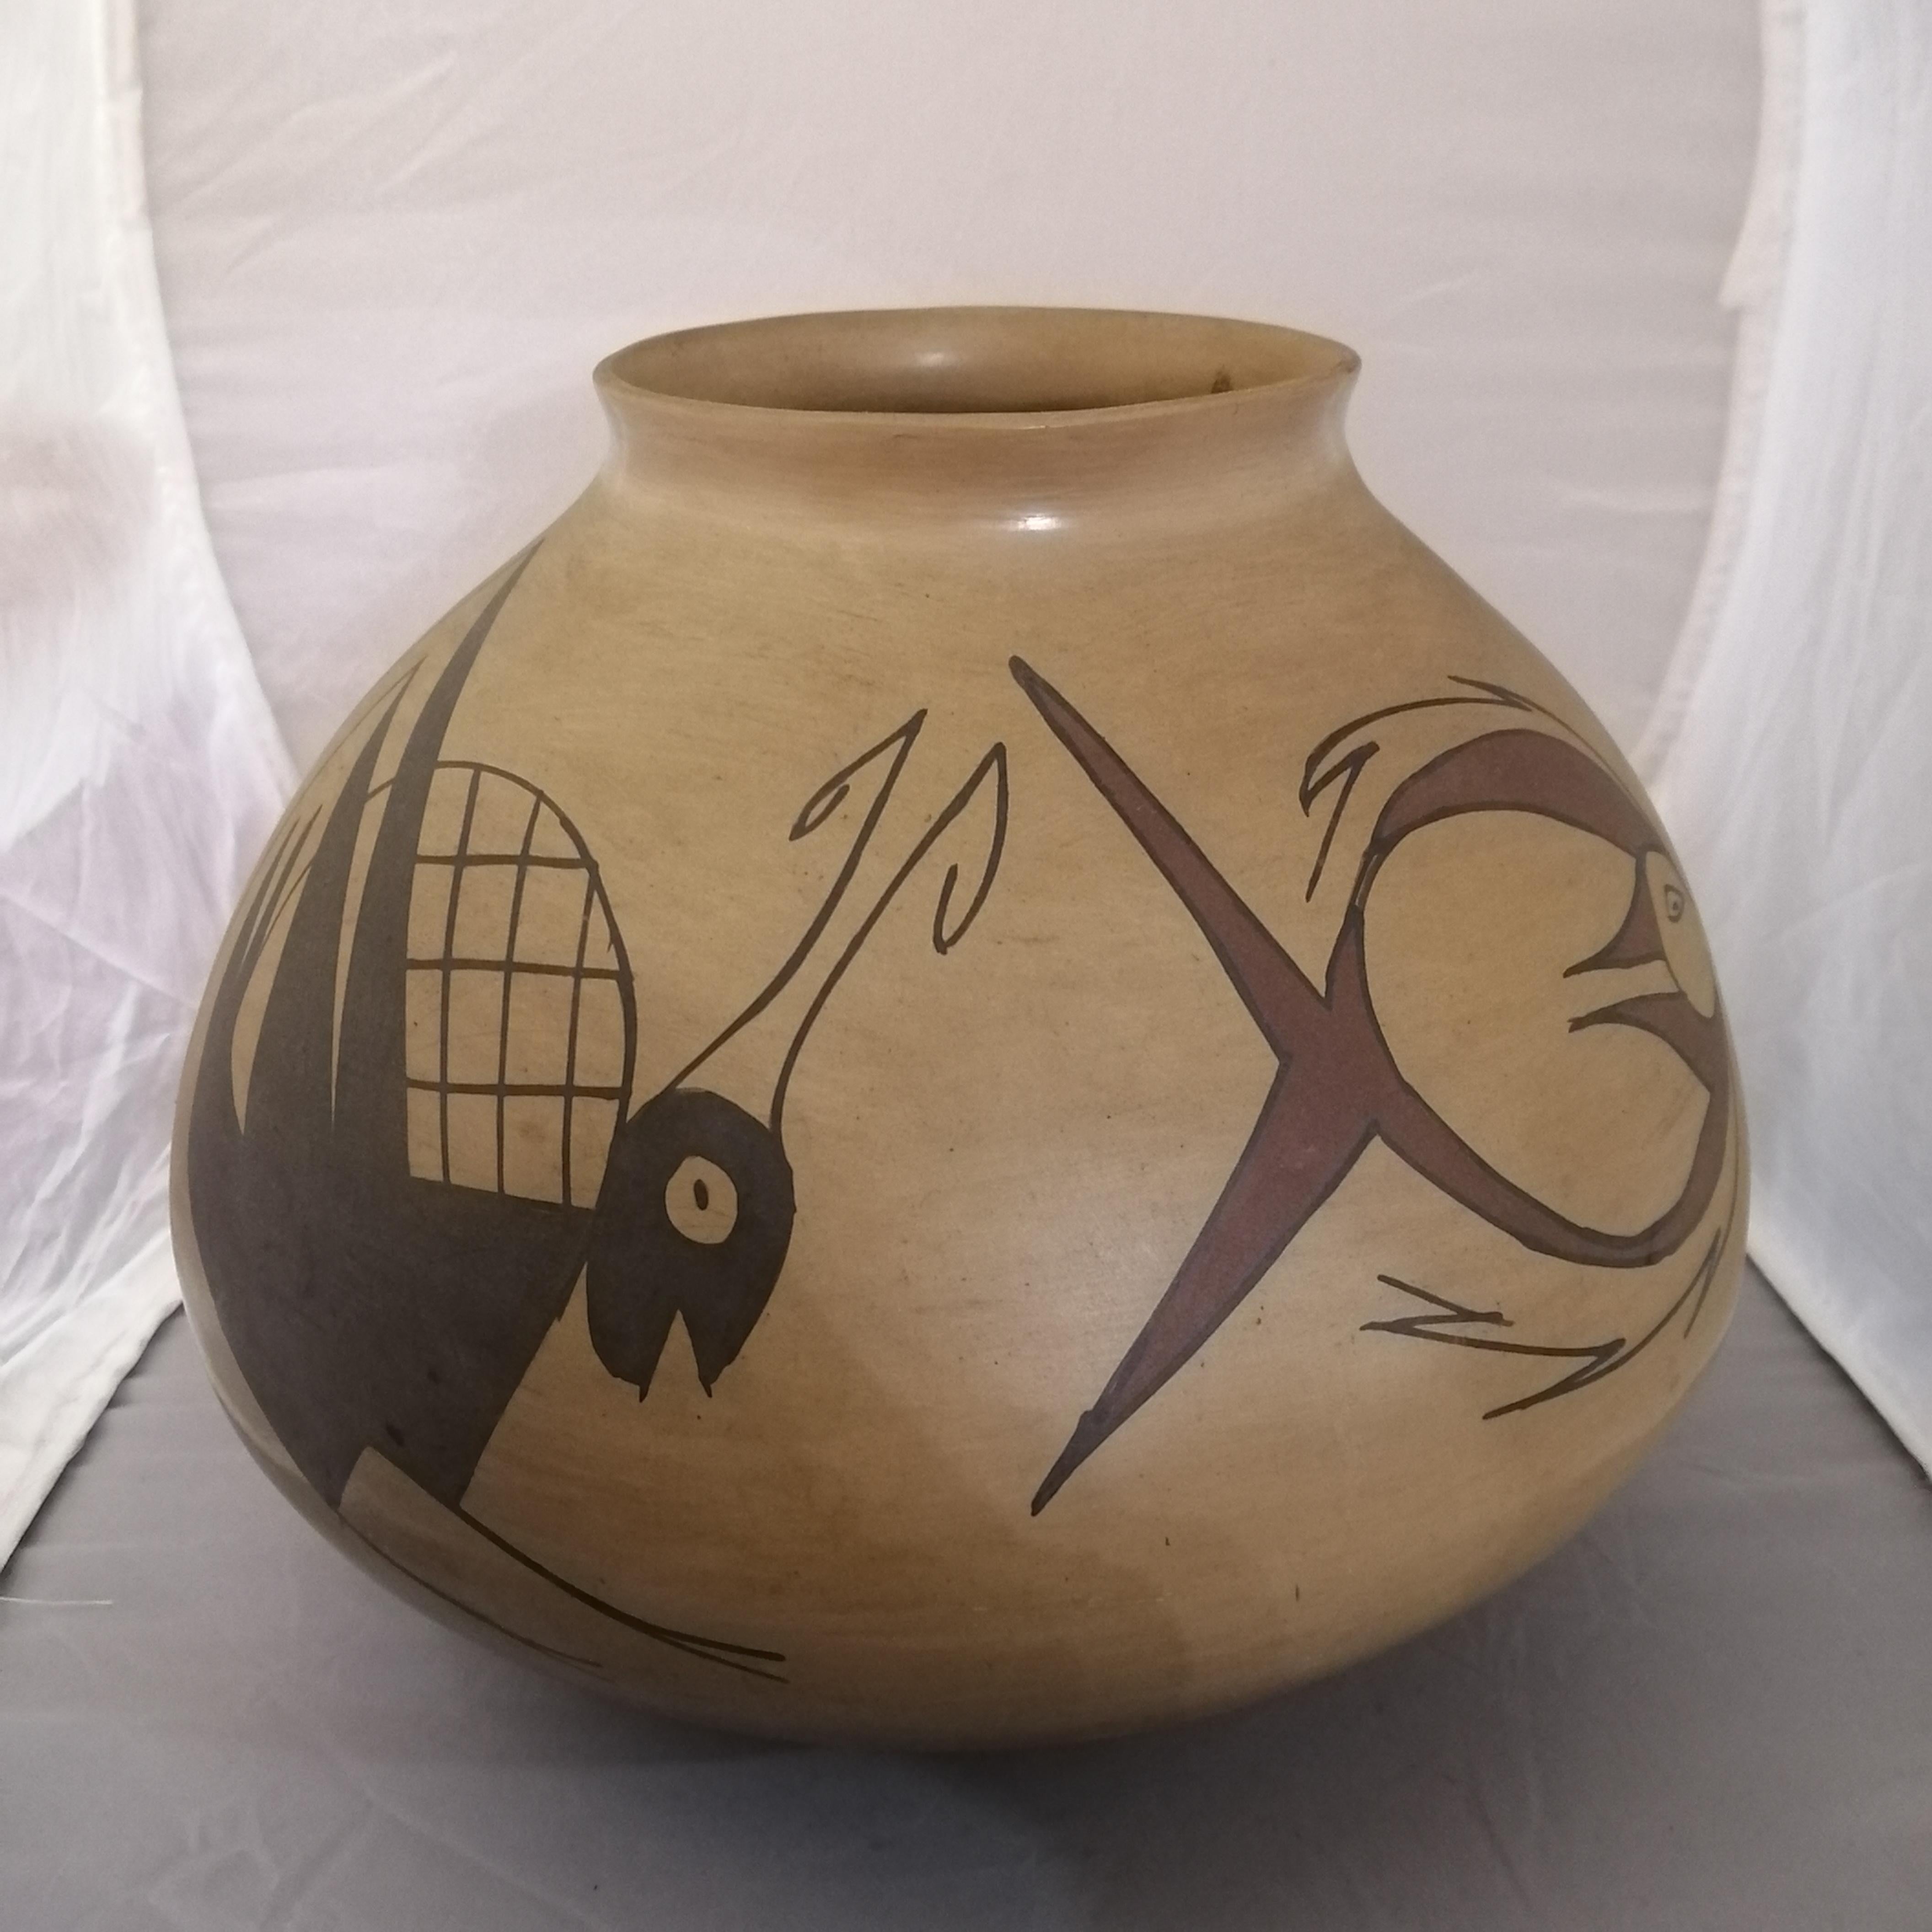 A fine Mata Ortiz pottery flower vase by Rafael Silveira. The bulged pottery shows four animal figures: a fish, a lizard, a grasshopper and another zoomorphic being. The vase is signed below.